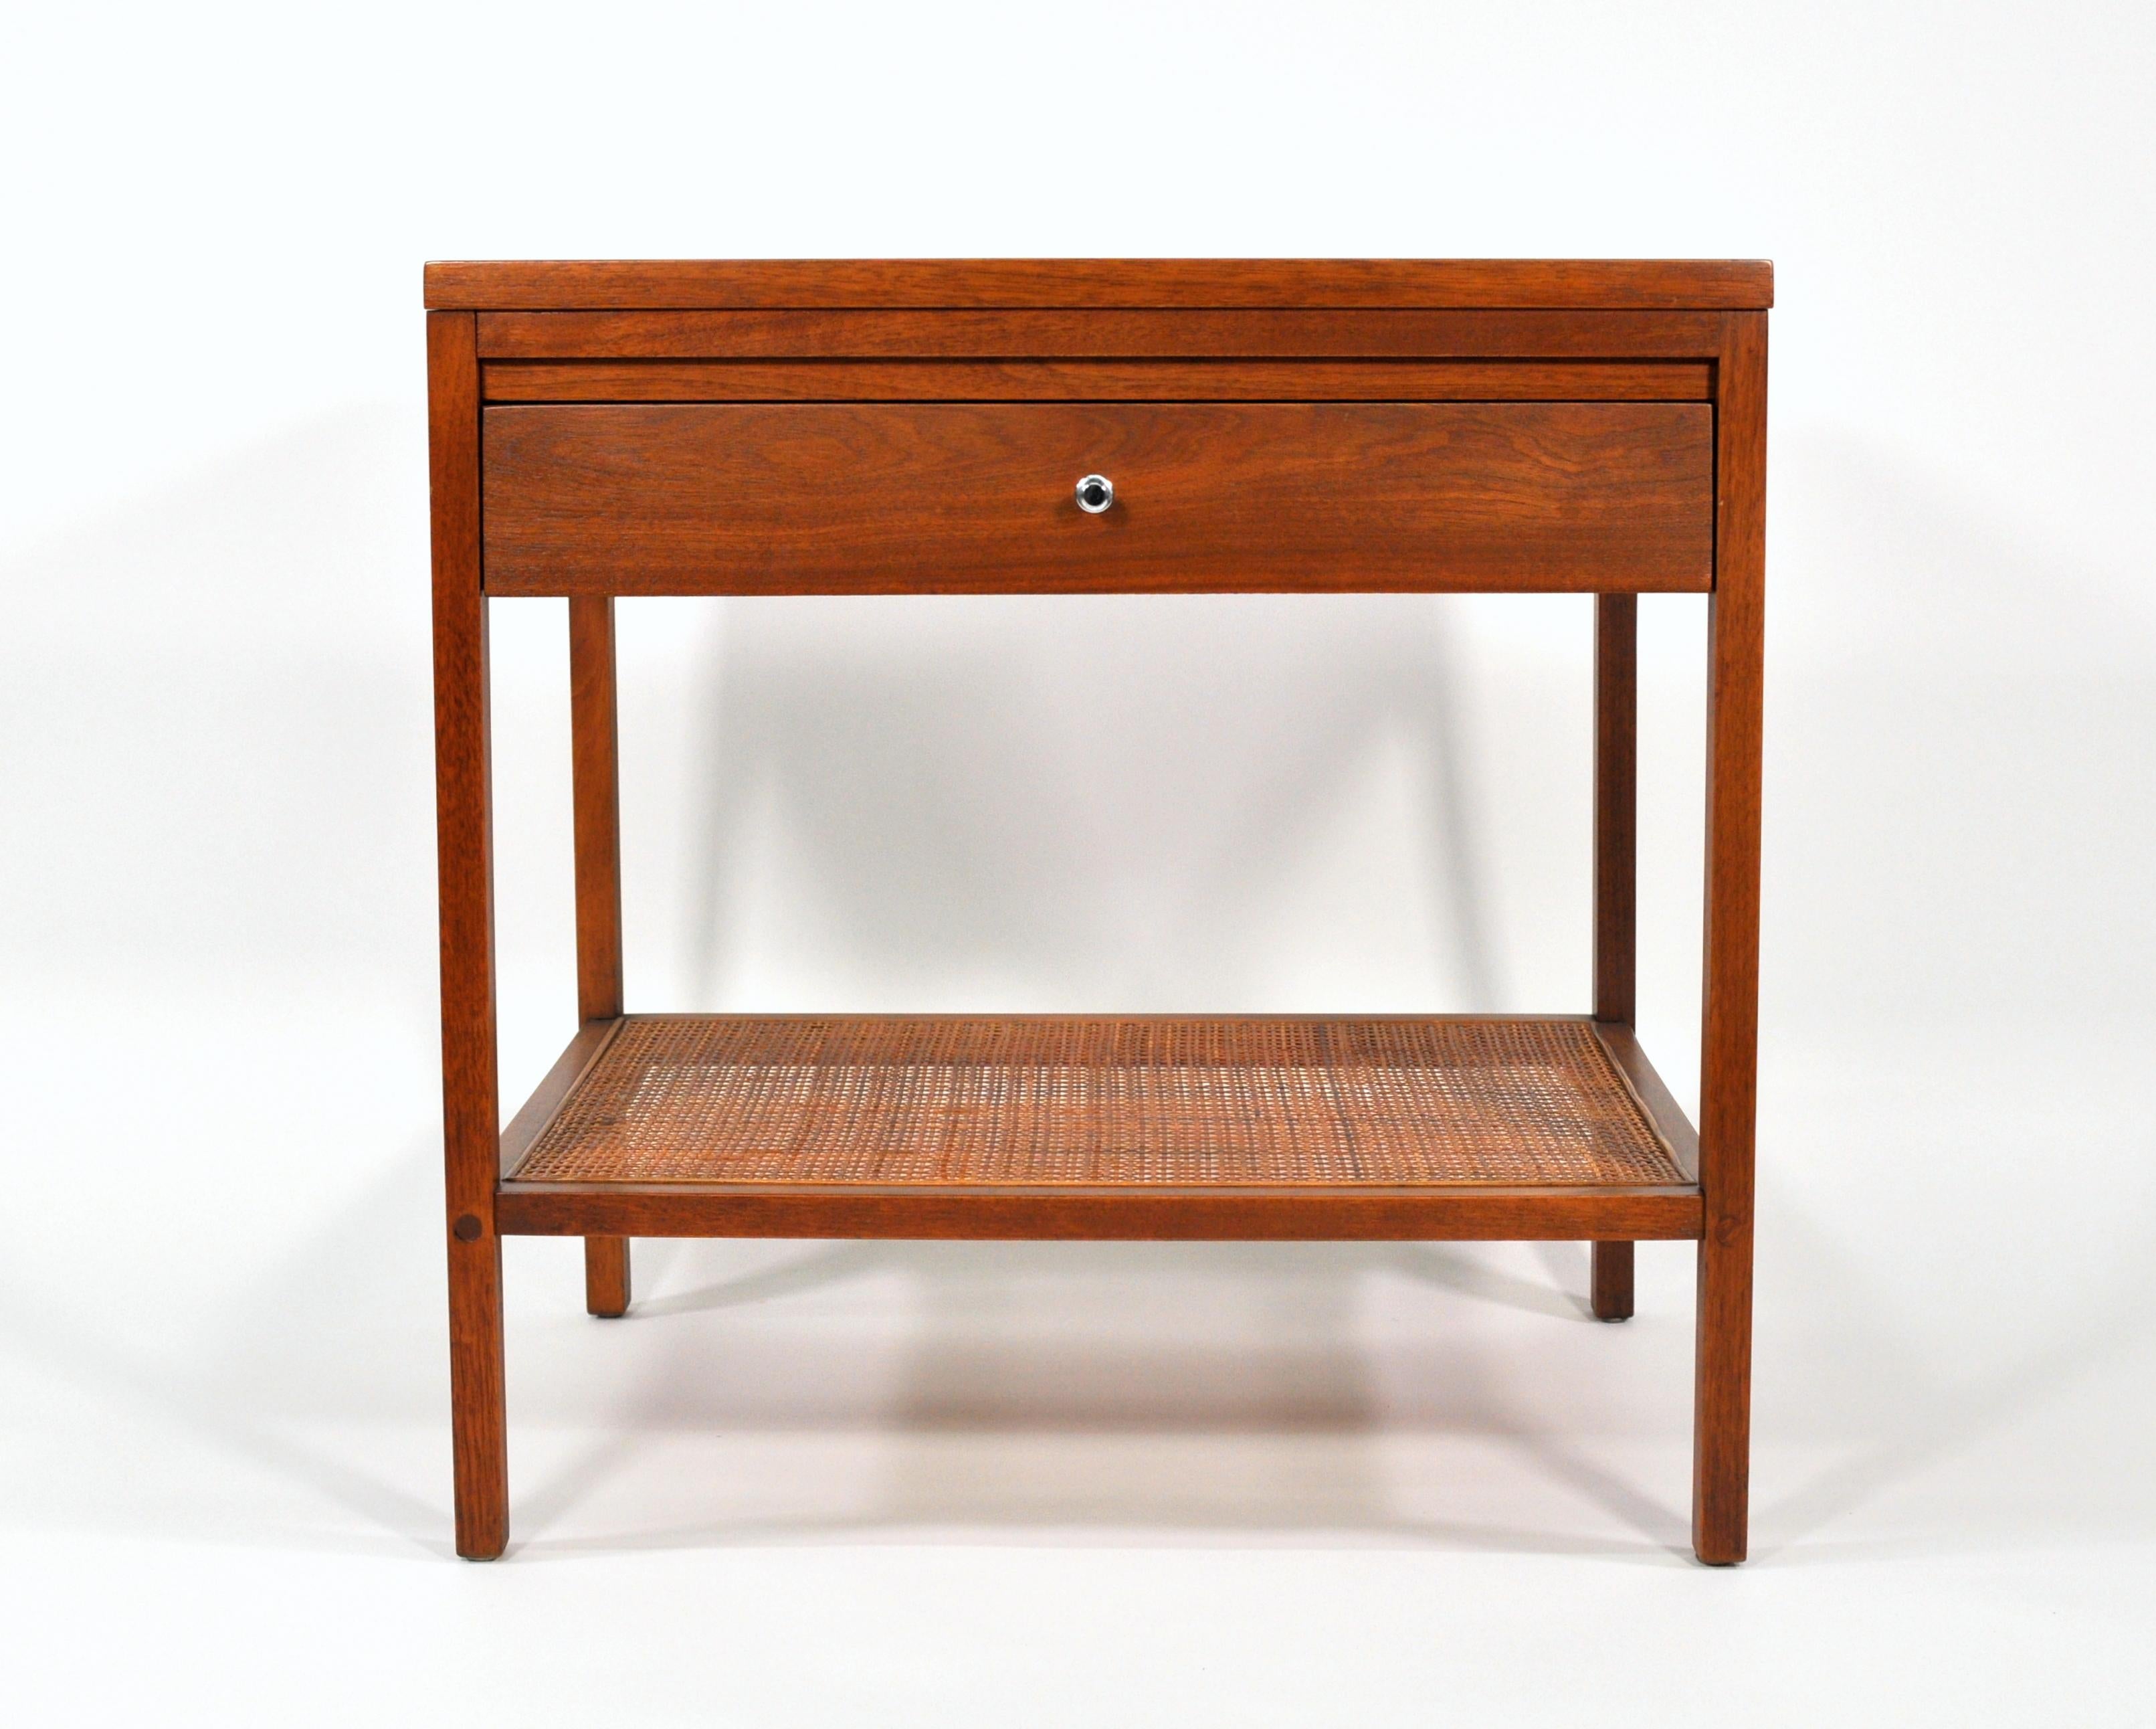 A rare Mid-Century Modern end or bedside table designed by Paul McCobb for the Lane Delineator series, which was only produced between 1961 and 1965. The walnut nightstand features a rosewood top, a single drawer with signature pull and a caned